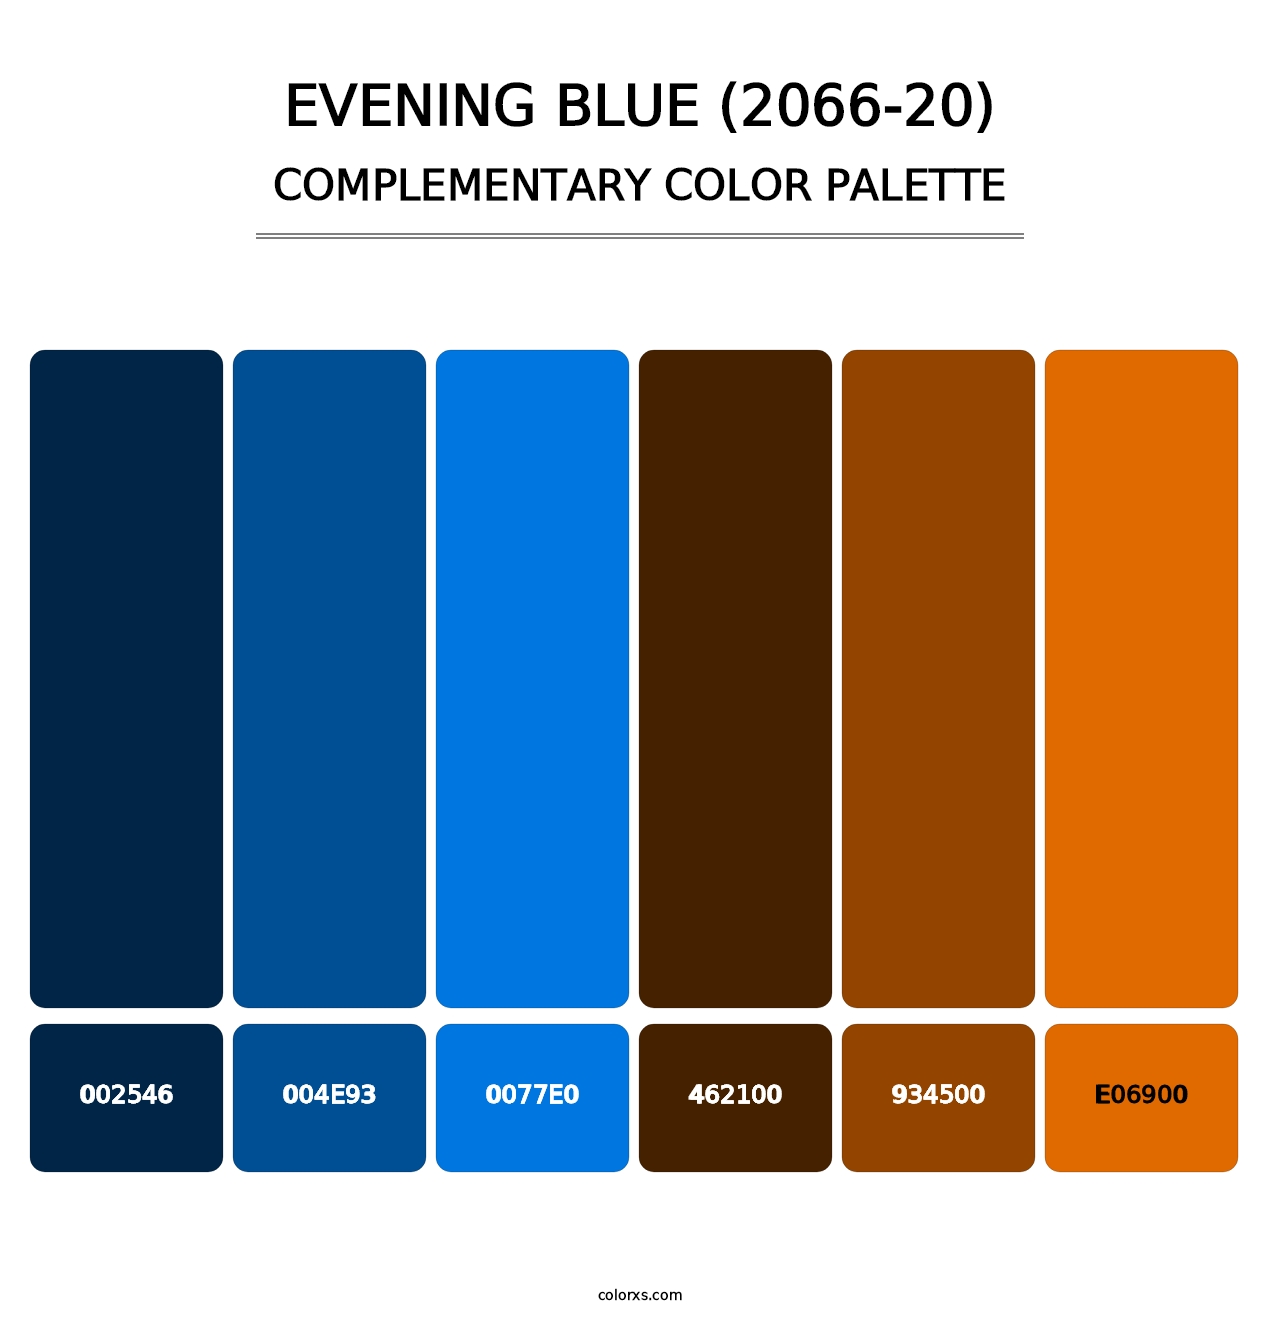 Evening Blue (2066-20) - Complementary Color Palette